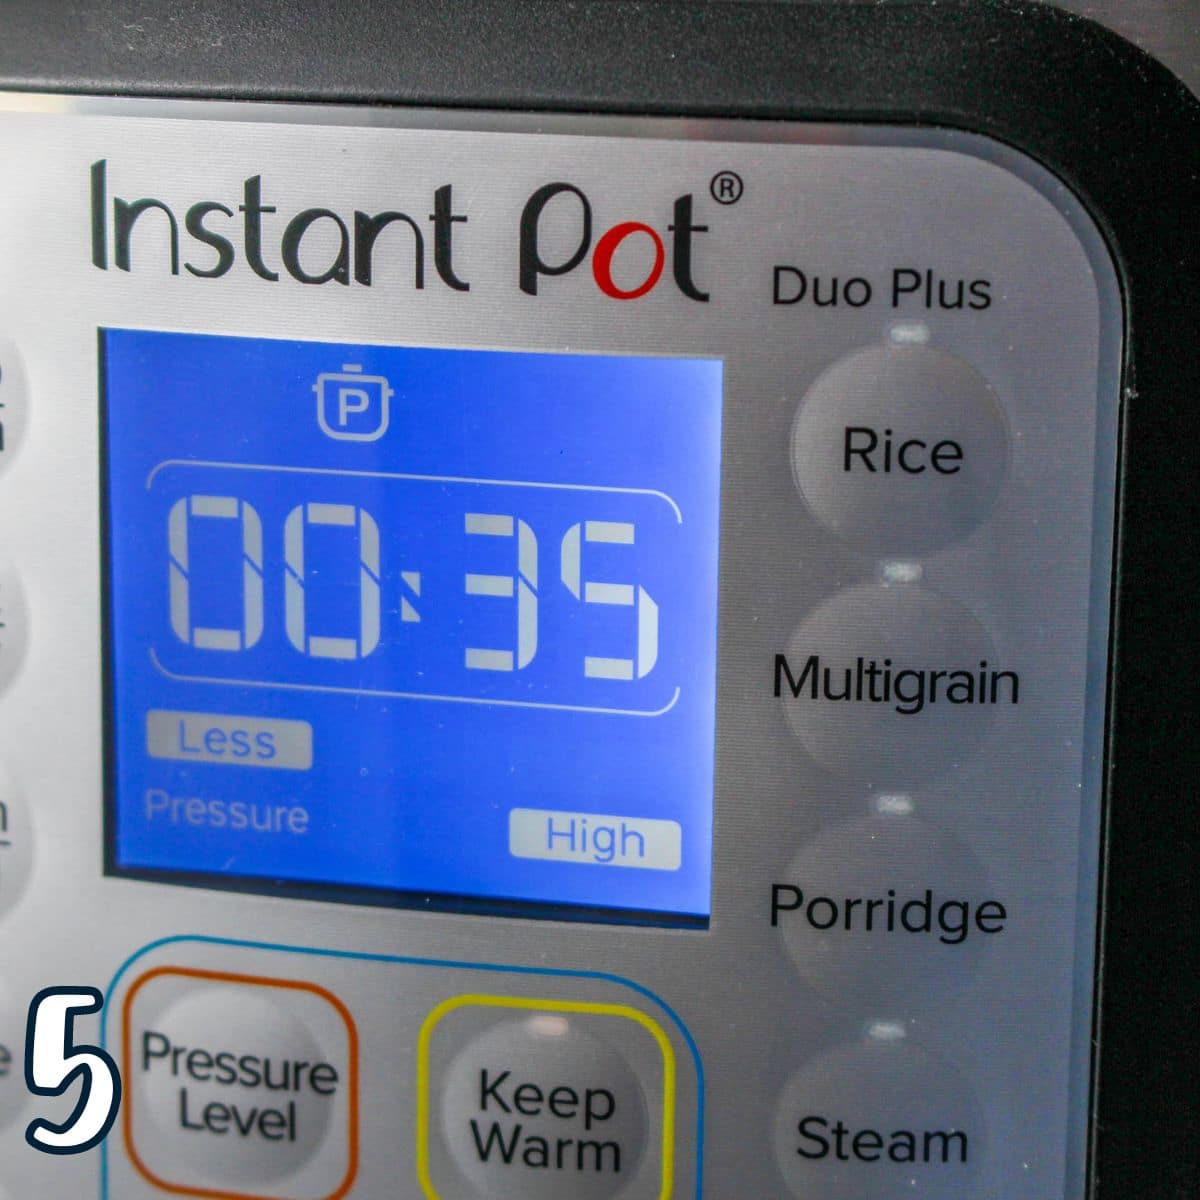 An Instant pot showing 35 minutes cook time. 